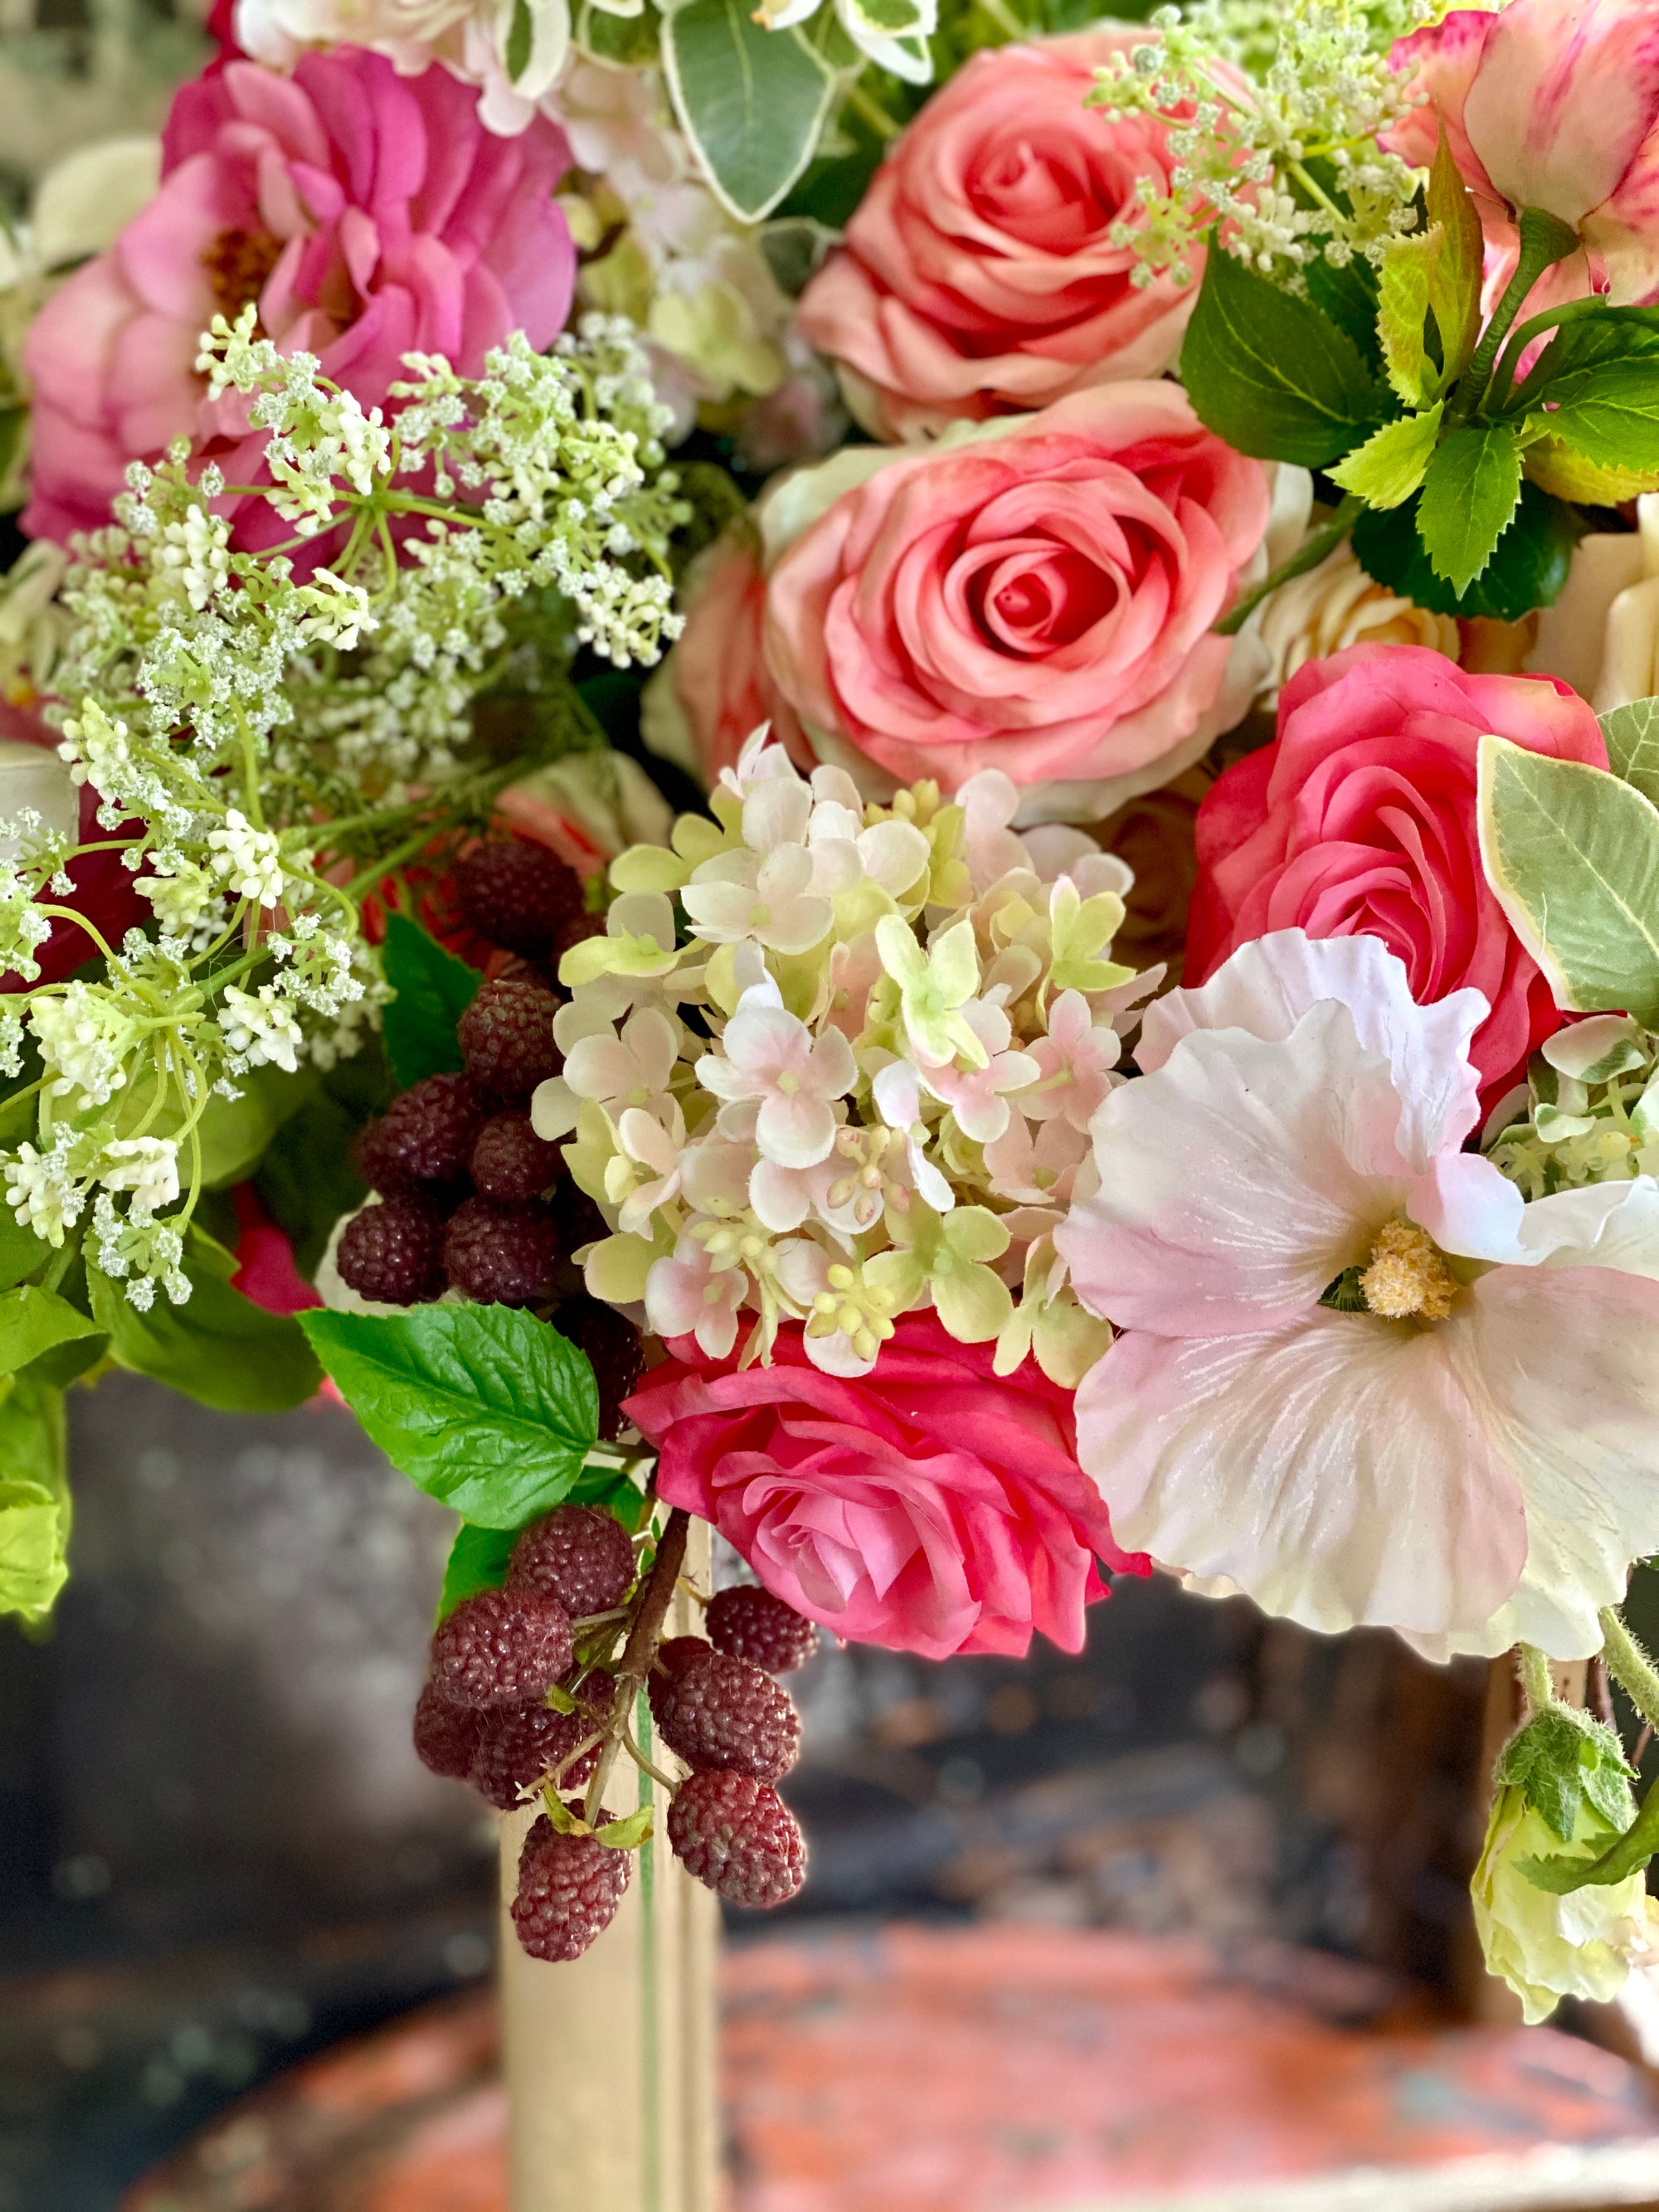 How To Get a Garden Fresh Look With Silk Flowers